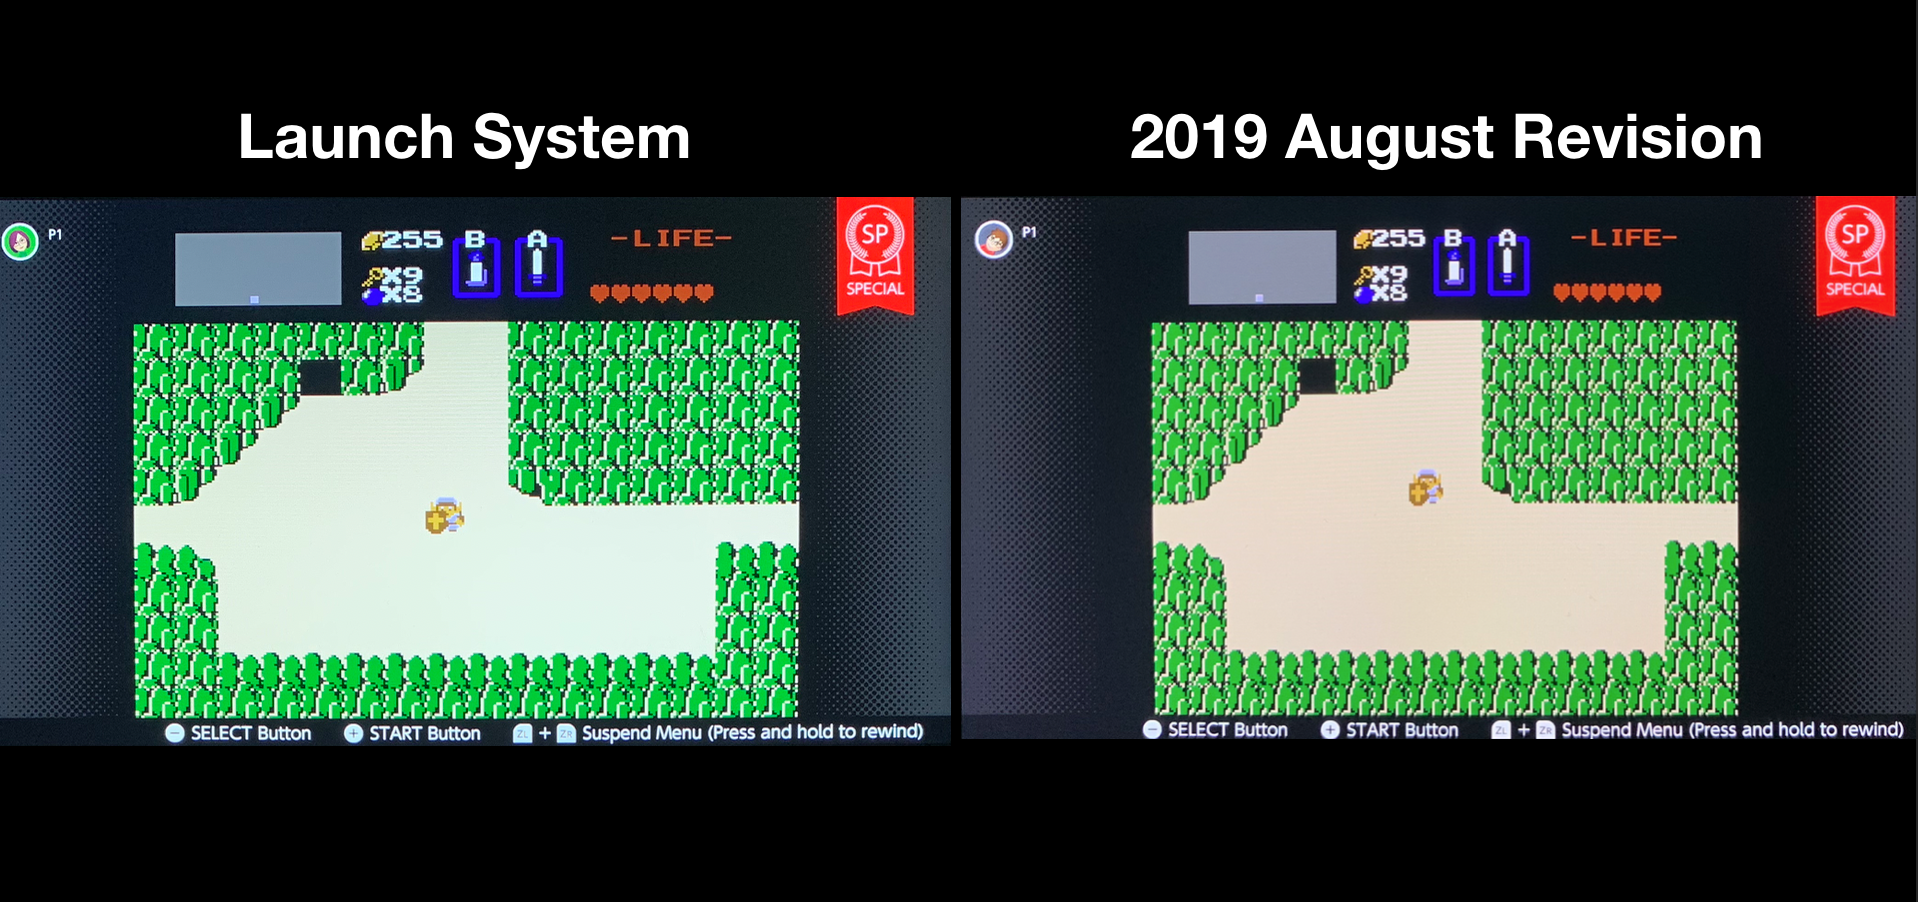 Nintendo Switch Revision Seems to Have a Warmer Color Screen